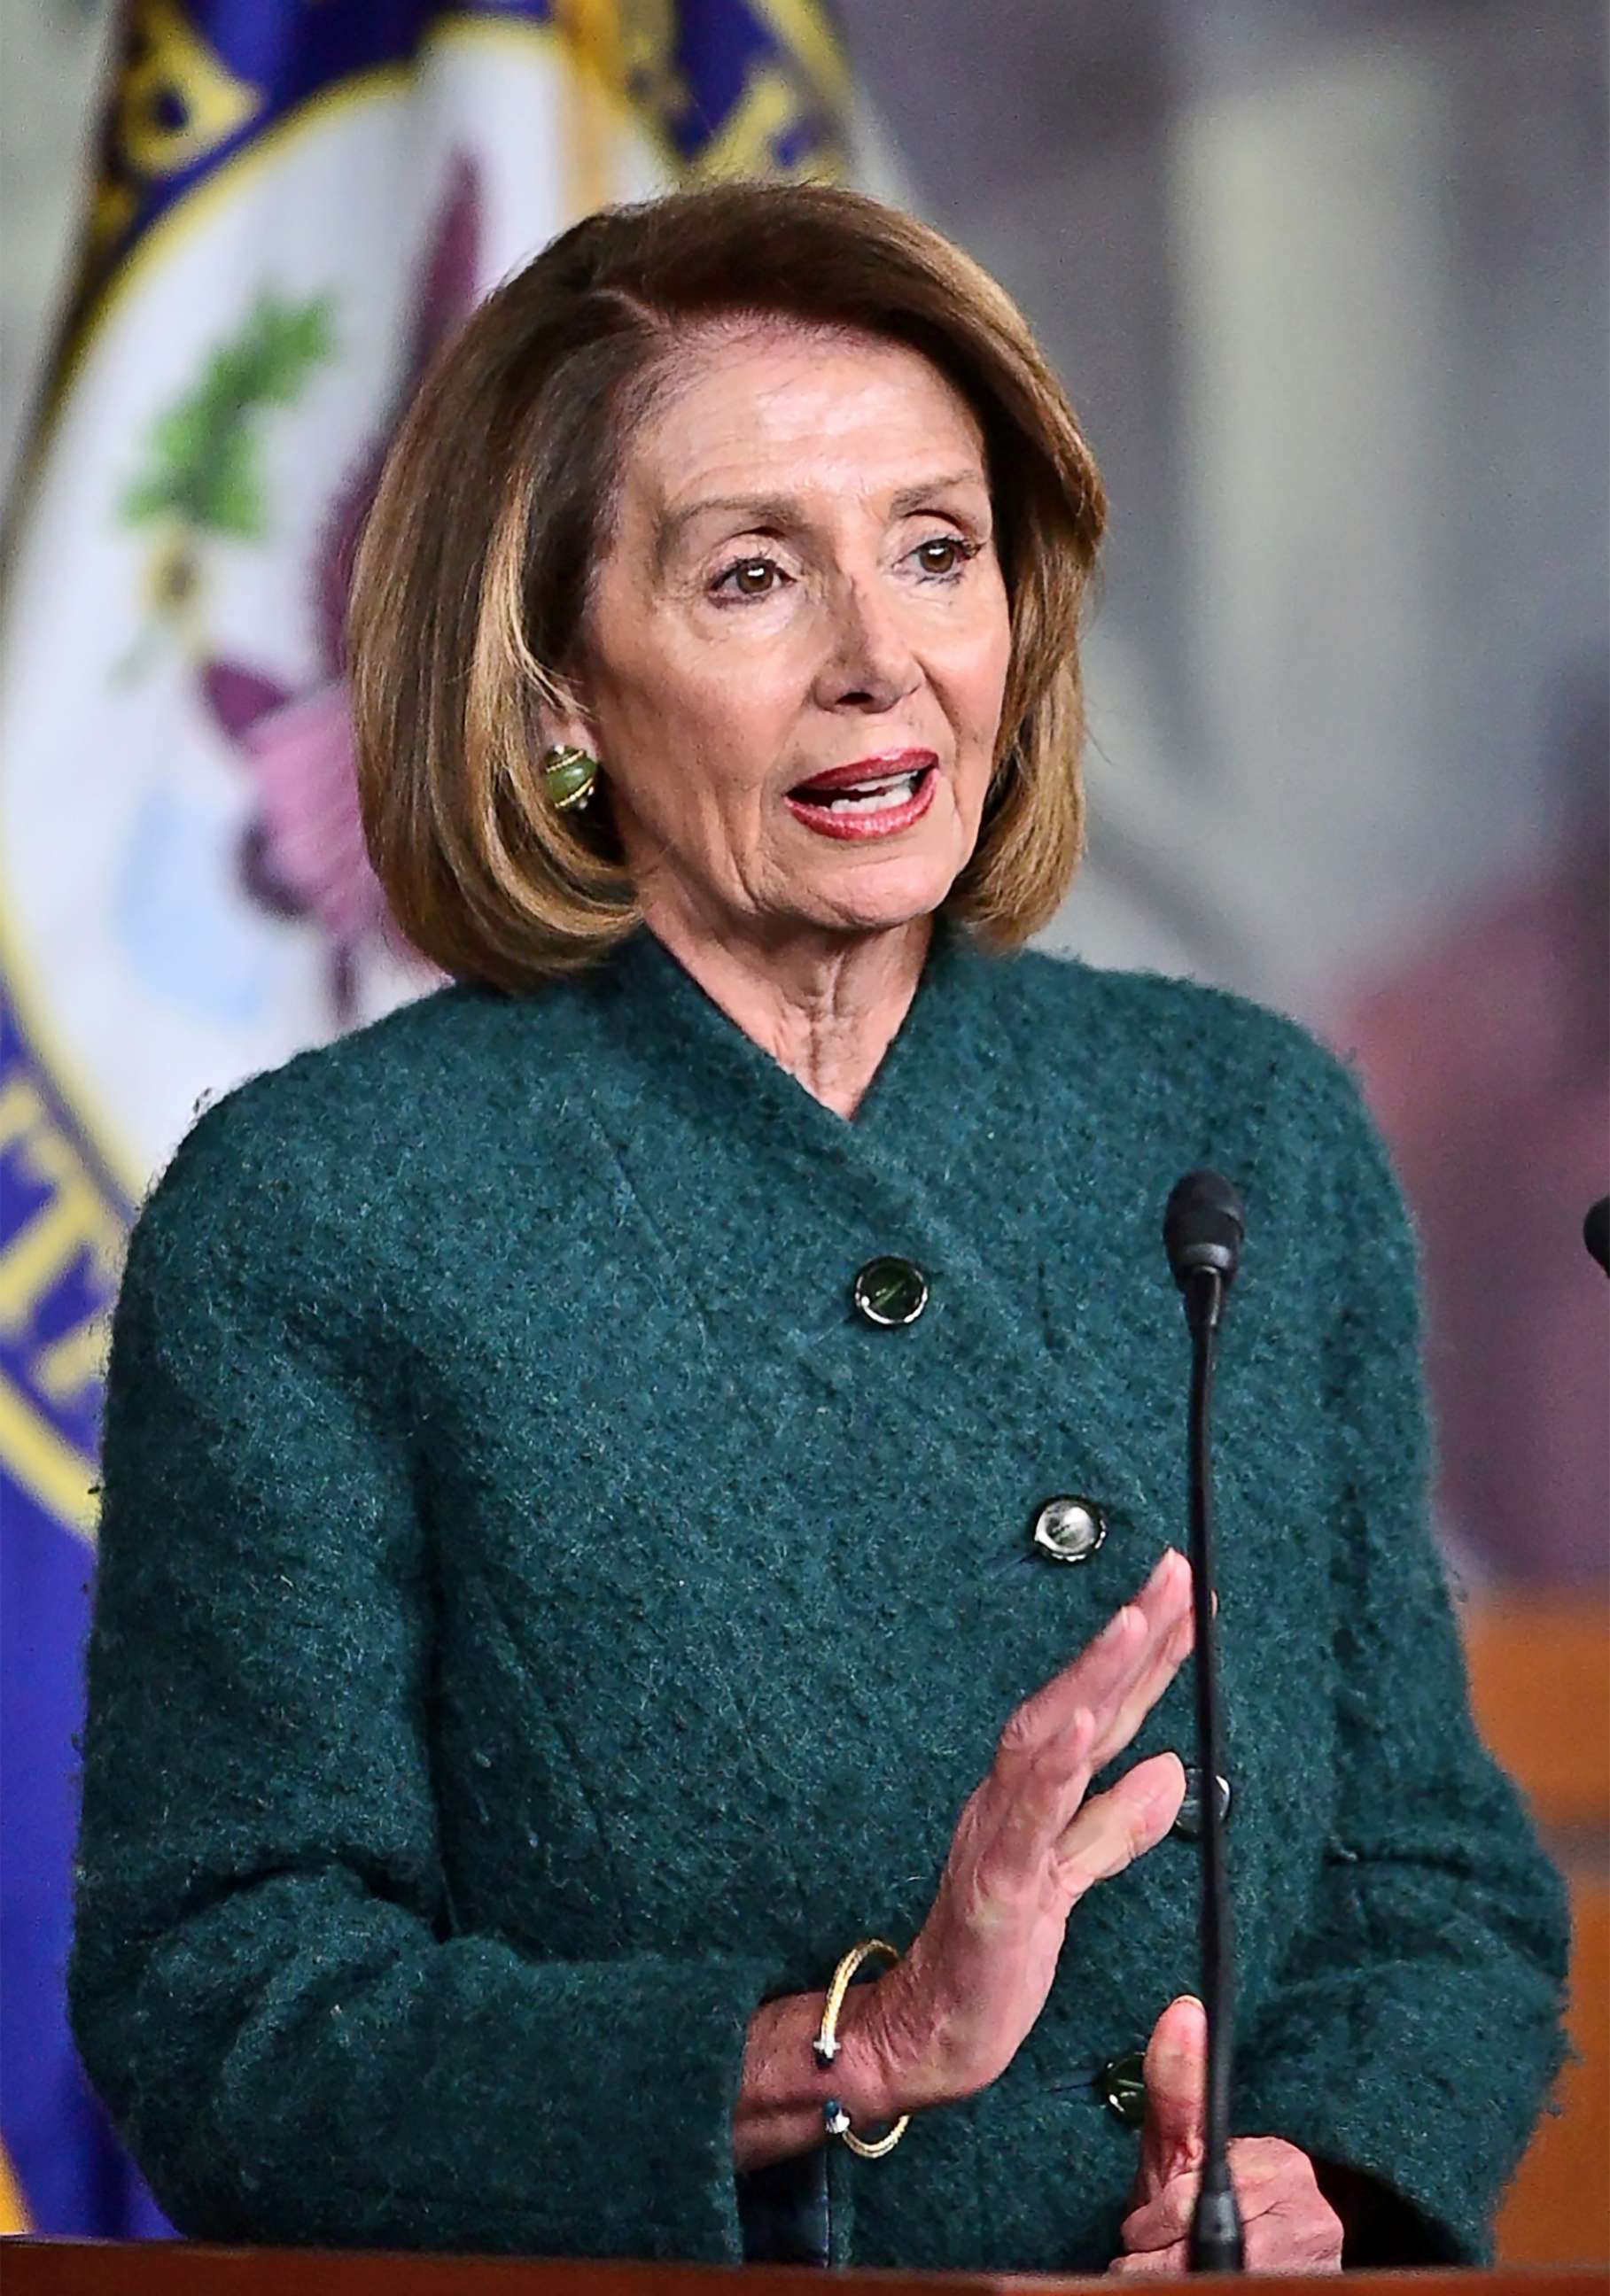 PHOTO: U.S. House of Representatives Nancy Pelosi conducts her weekly press conference in the U.S. Capitol in Washington, D.C., Jan. 10, 2019.